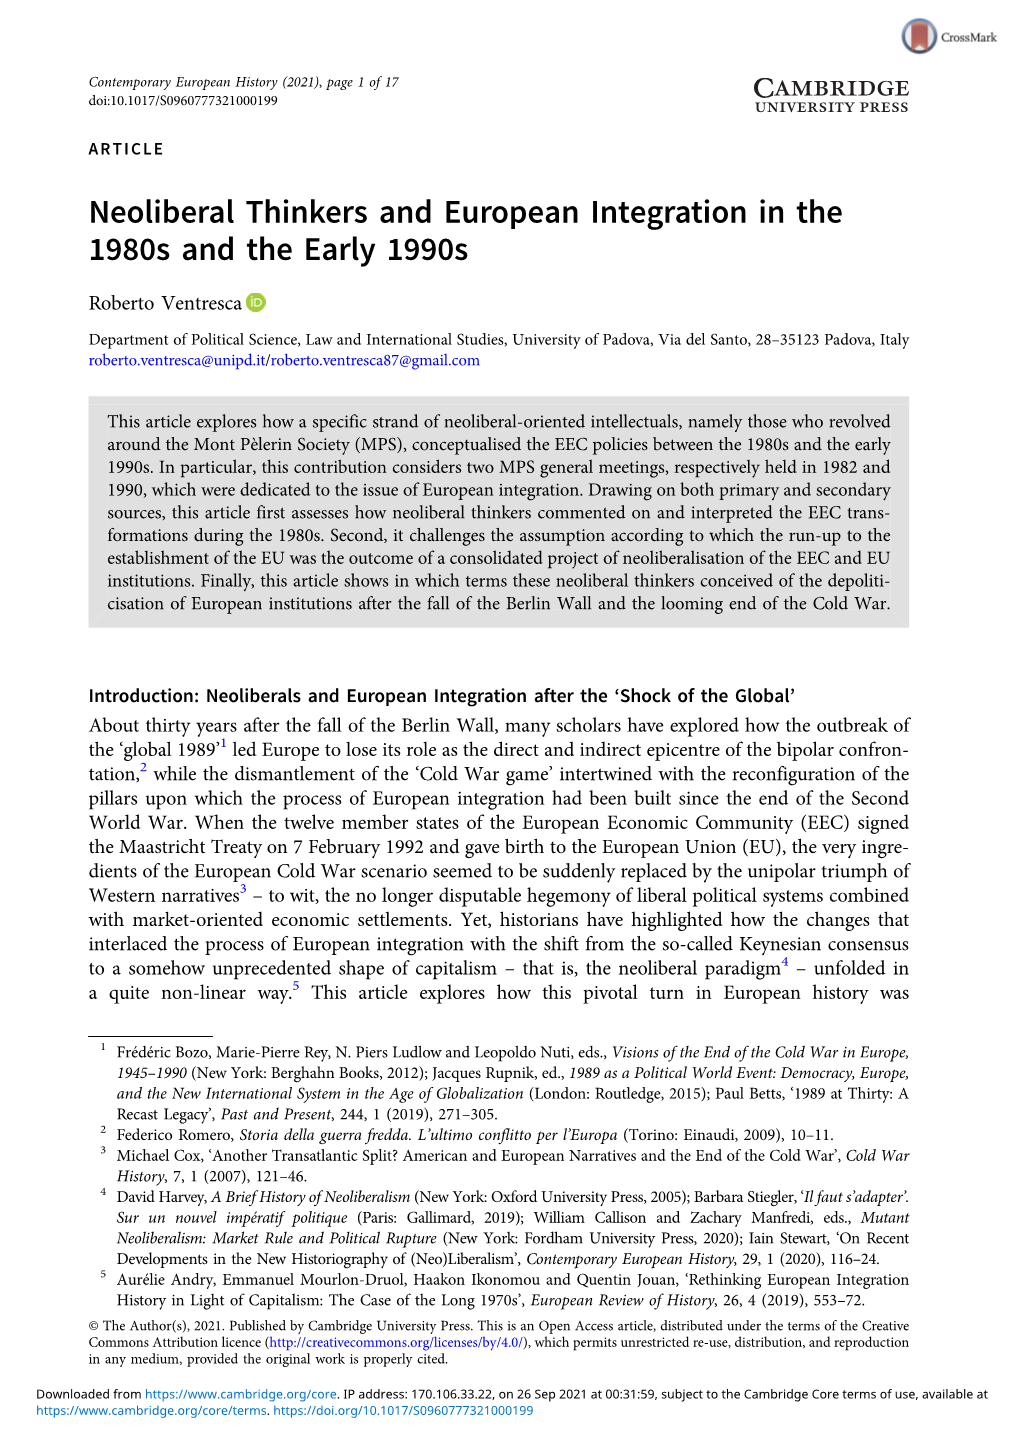 Neoliberal Thinkers and European Integration in the 1980S and the Early 1990S